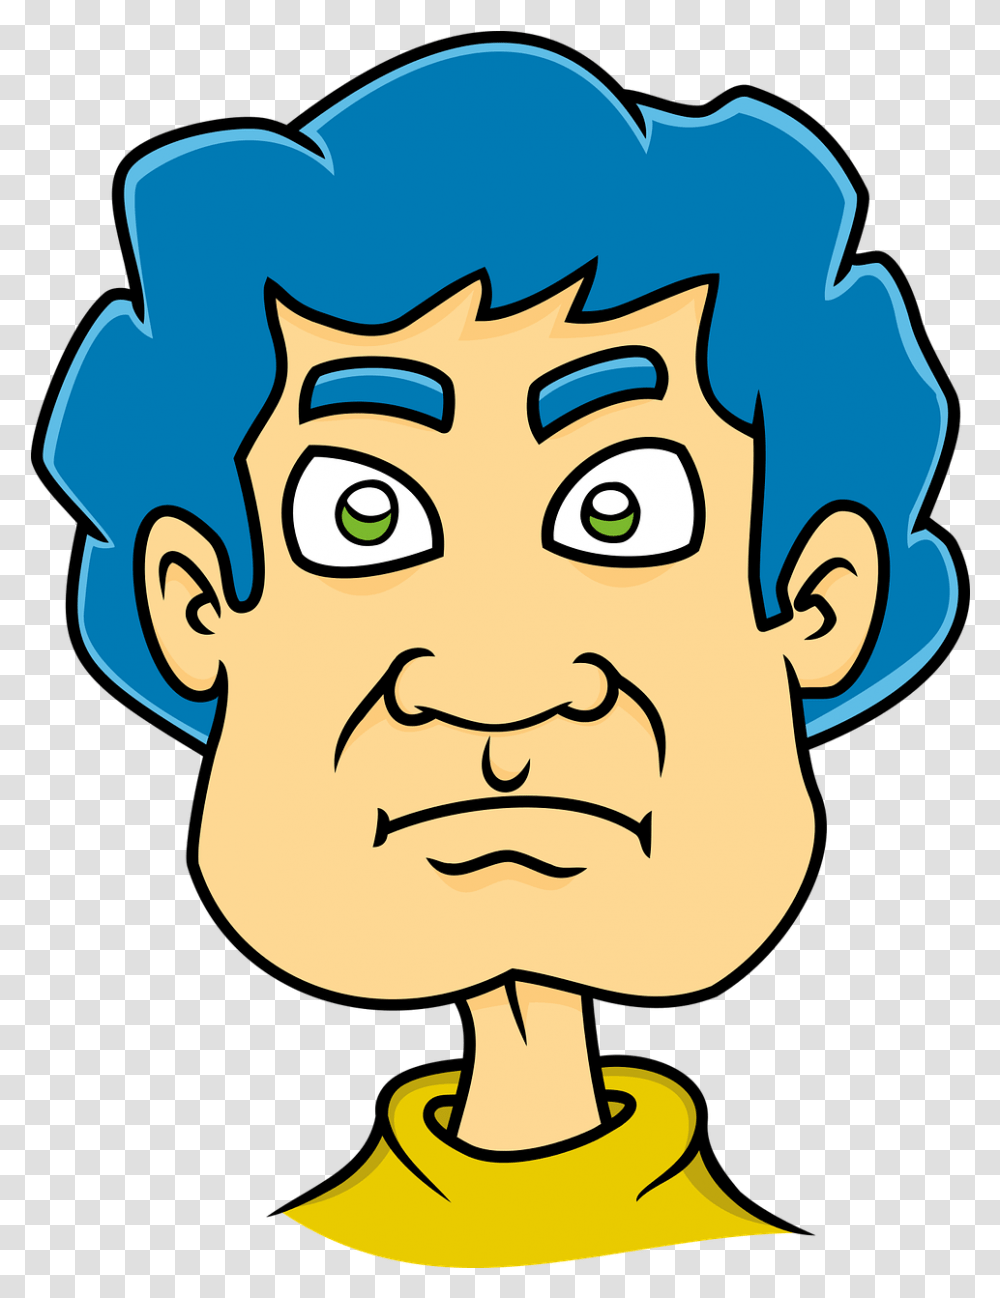 Angry Man Blue Hair Caricature Free Vector Graphic On Pixabay Angry Girl Dface Cartoon, Head, Text, Photography, Portrait Transparent Png